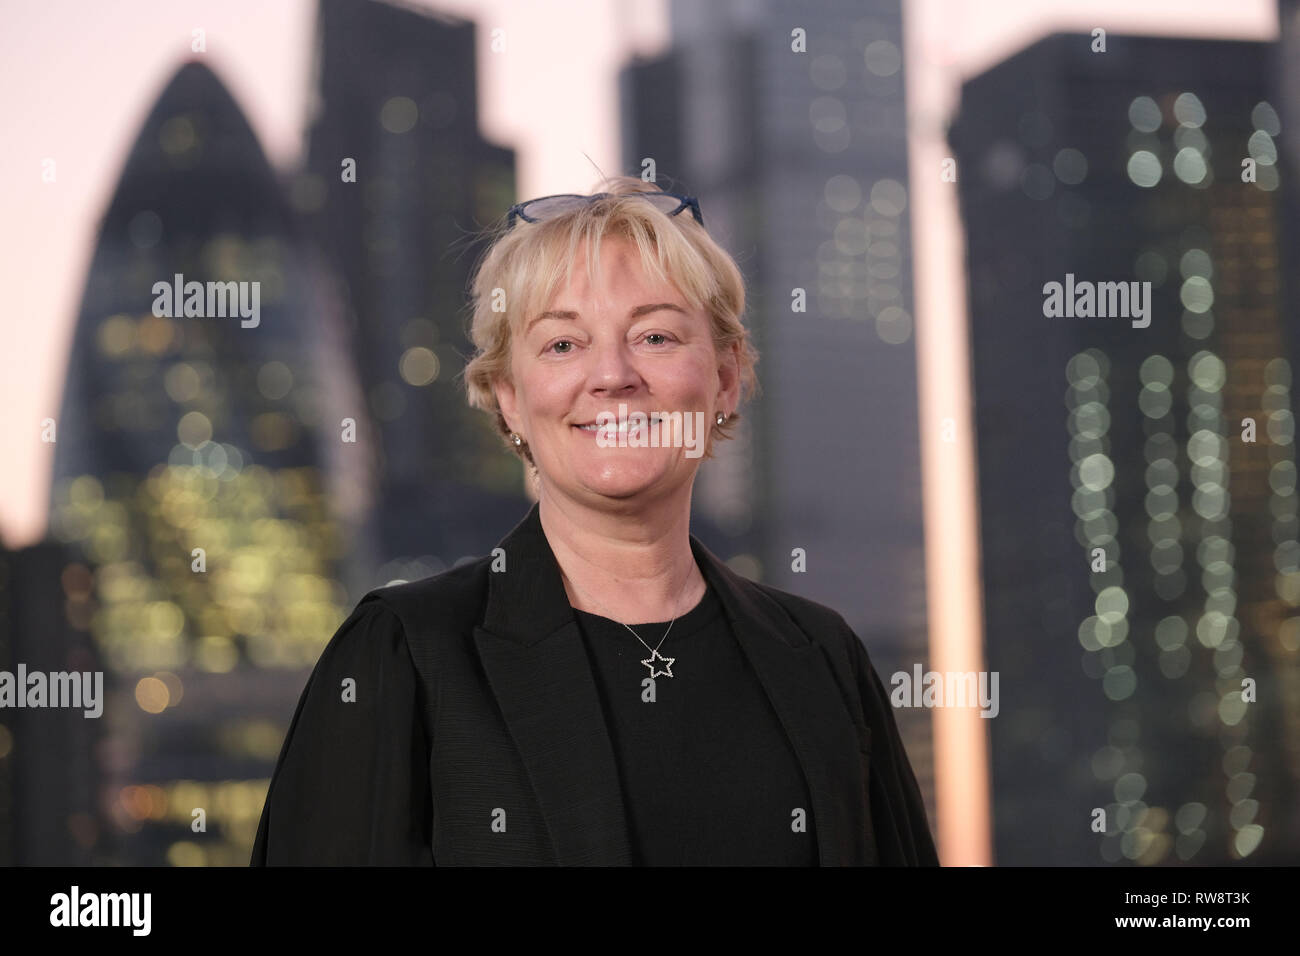 Jo Malone with background of London Financial District Stock Photo